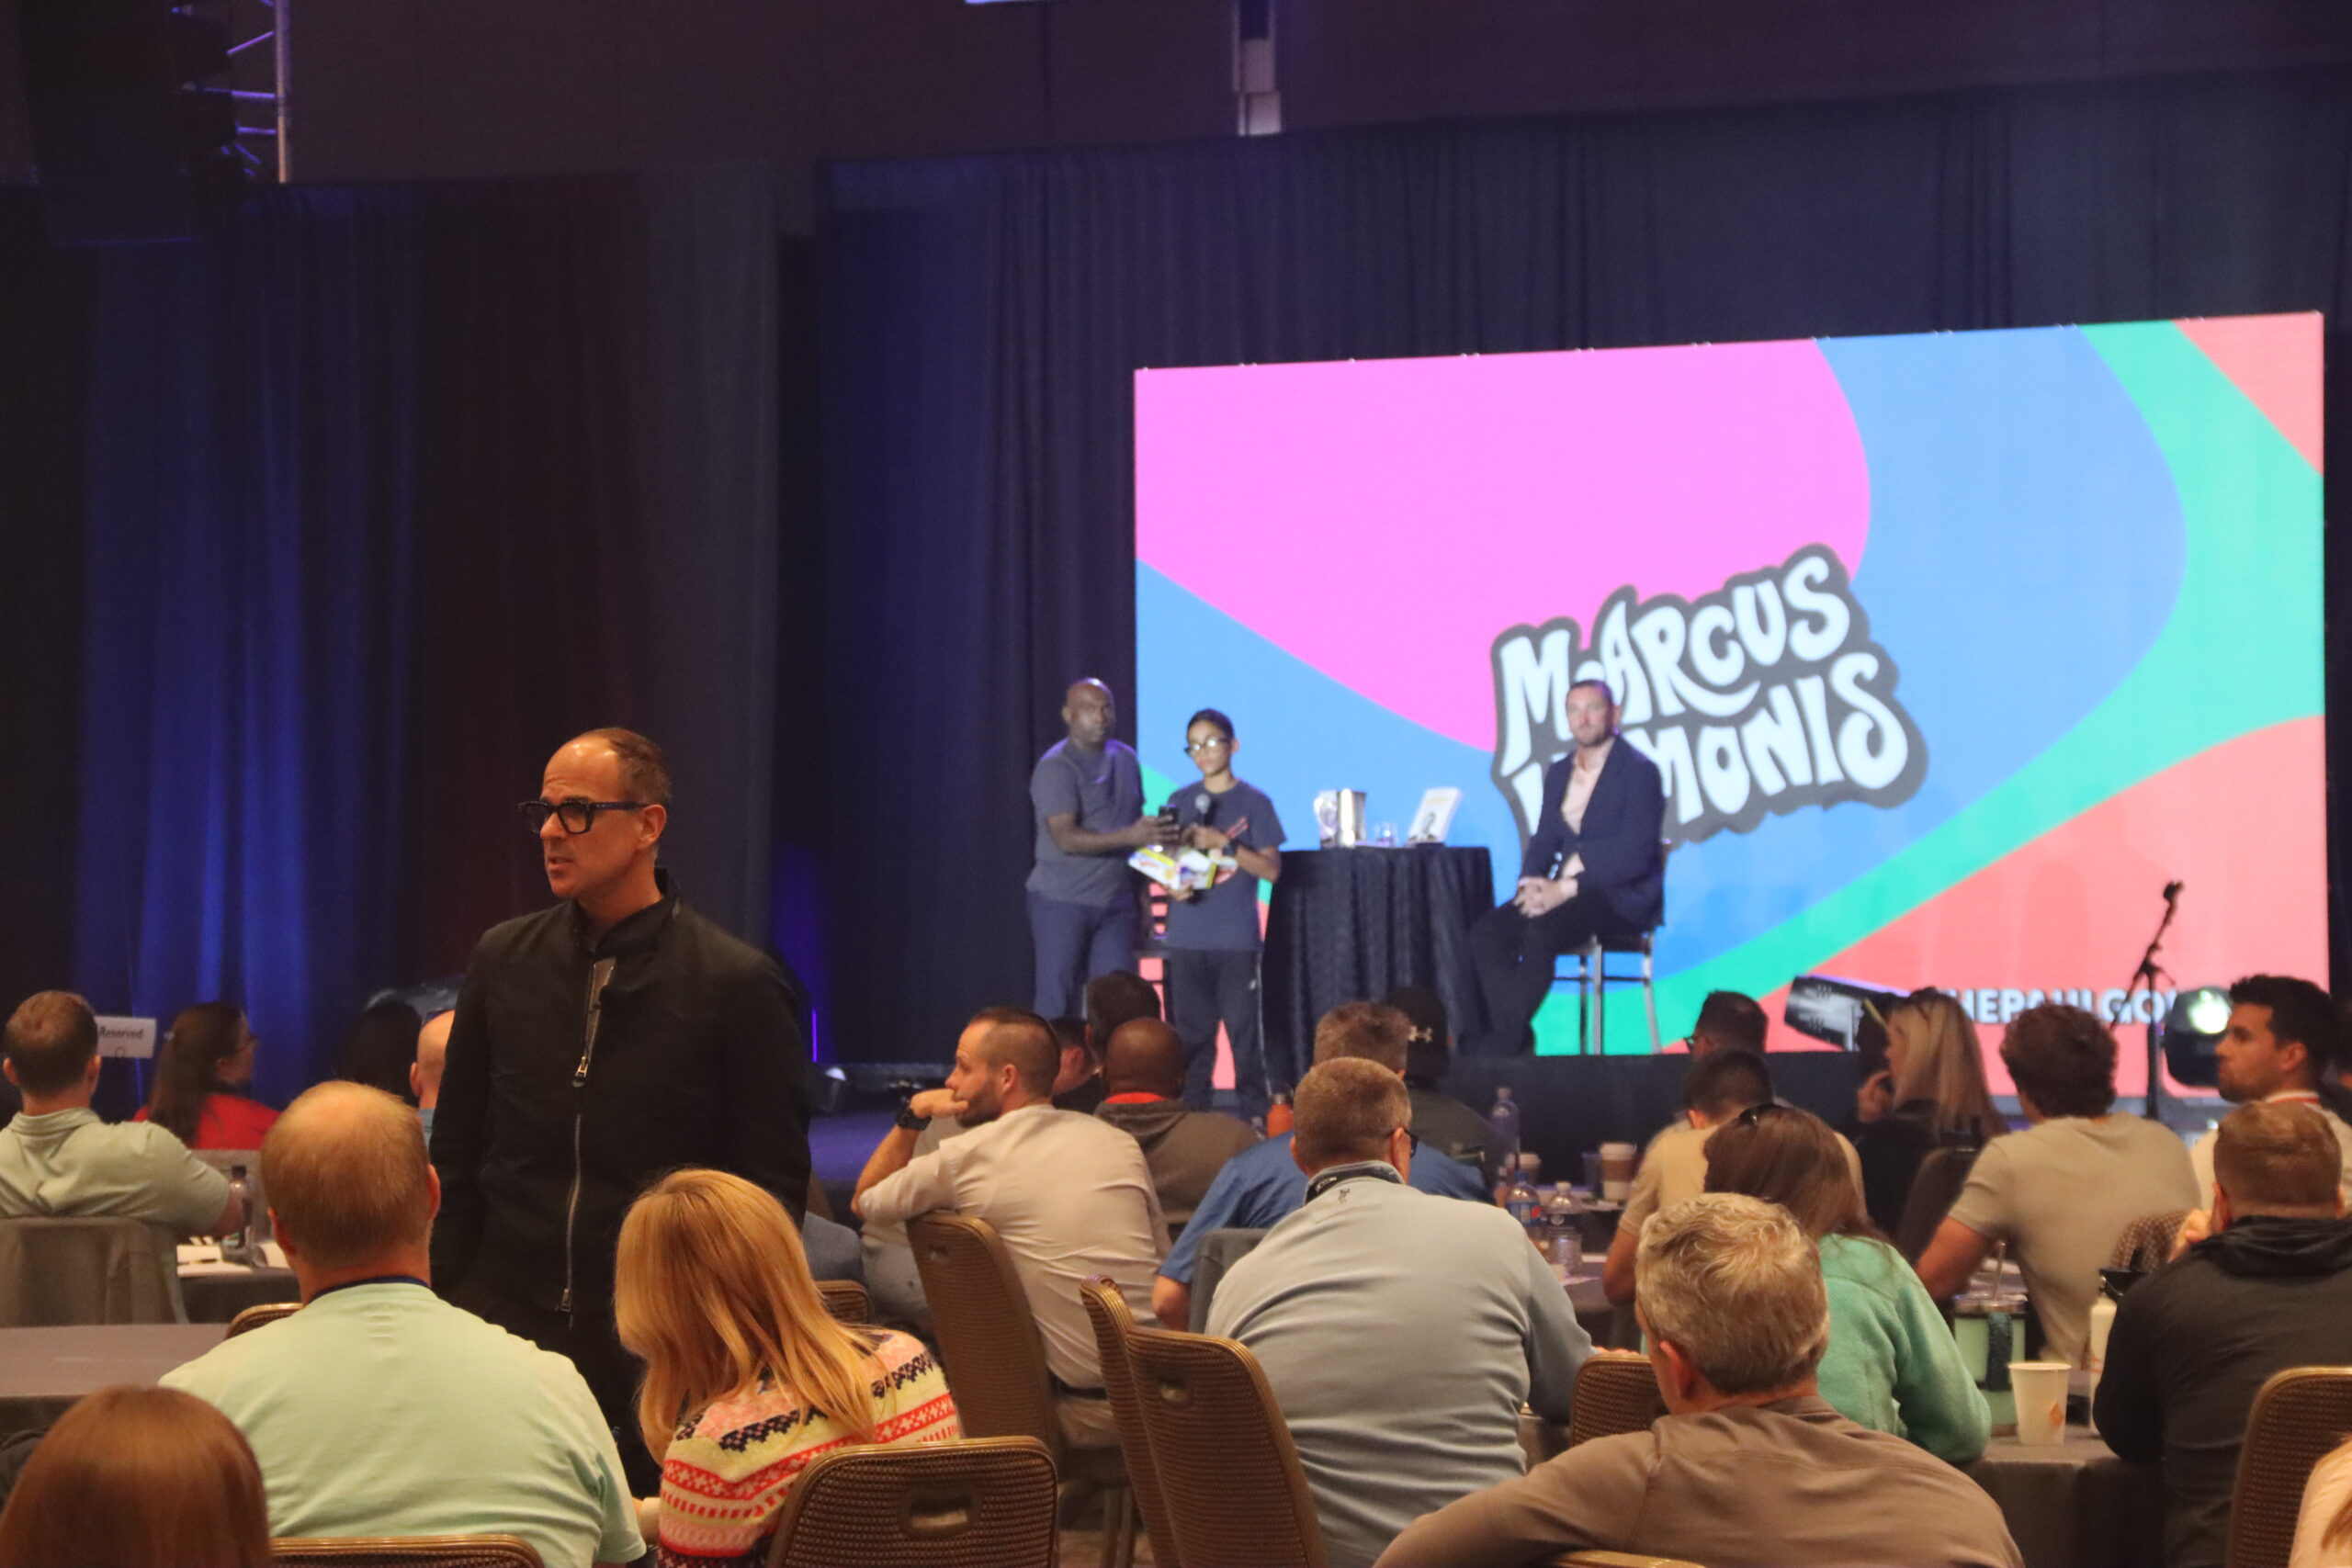 Xavier and Ricky Join Paul on Stage During Marcus Lemonis' Keynote